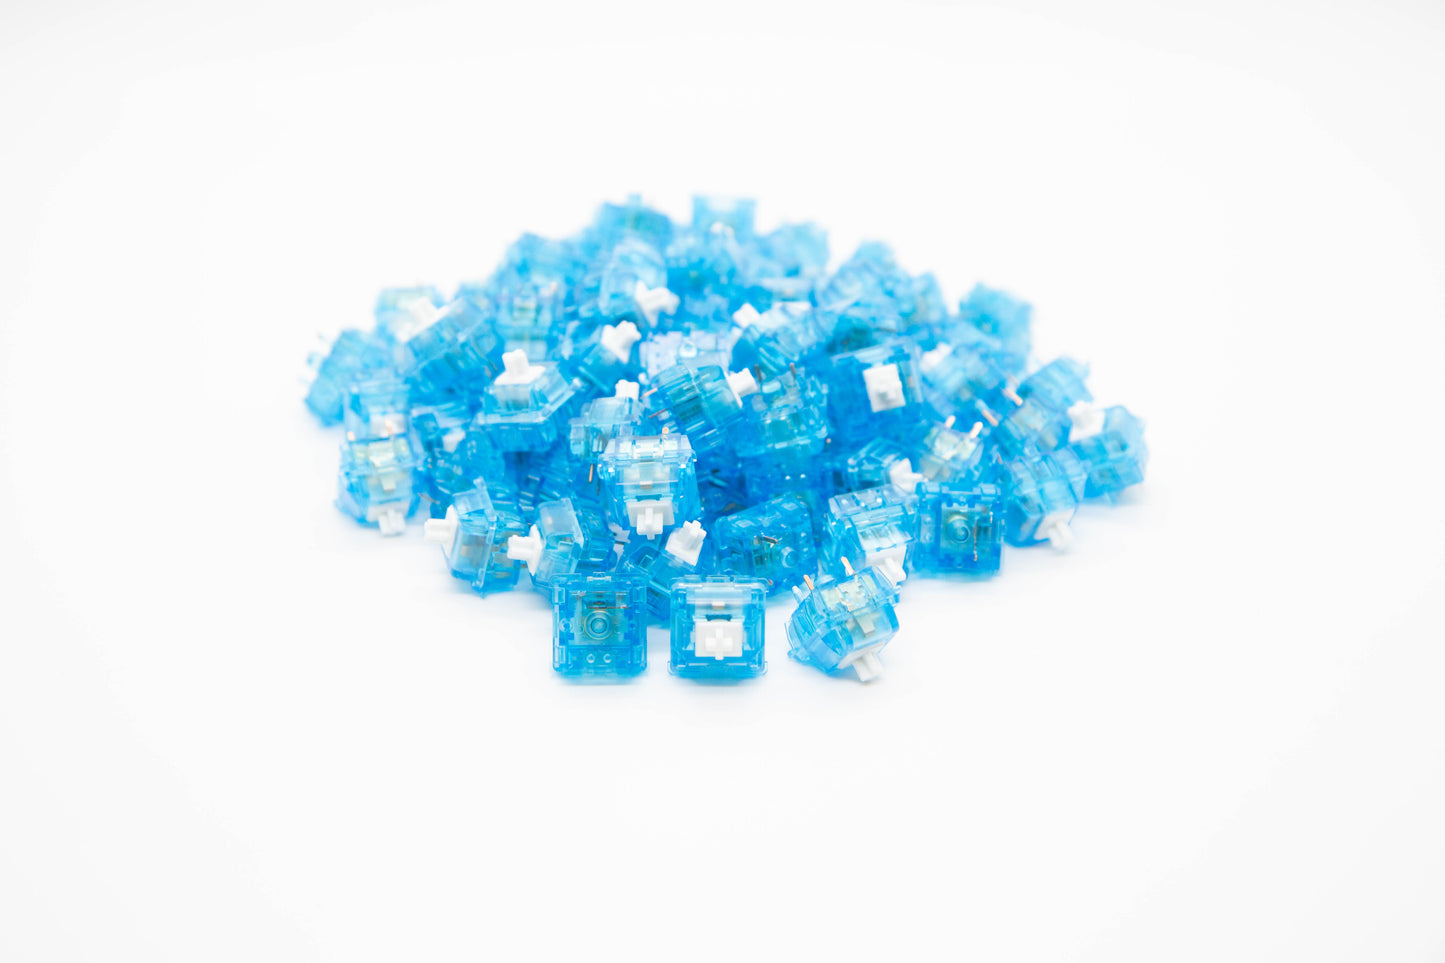 Close-up shot of a pile of SP-Star Marble Soda Original mechanical keyboard switches featuring blue transparent housing and white stems